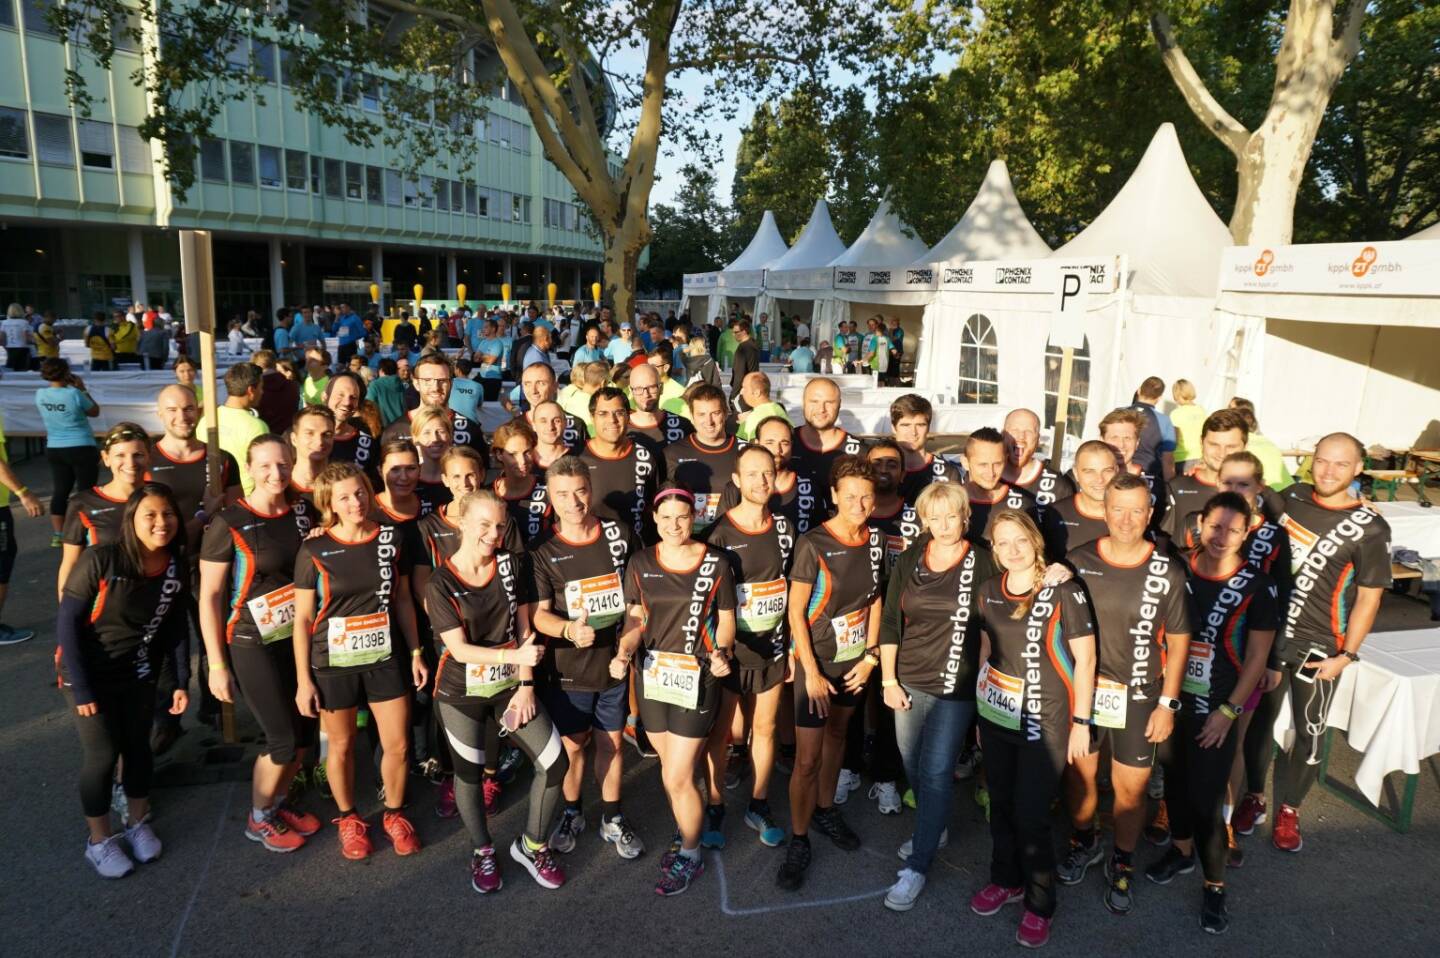 Wienerberger - Congratulations to all 15 Wienerberger Teams who participated at yesterday’s #BusinessRun in Vienna